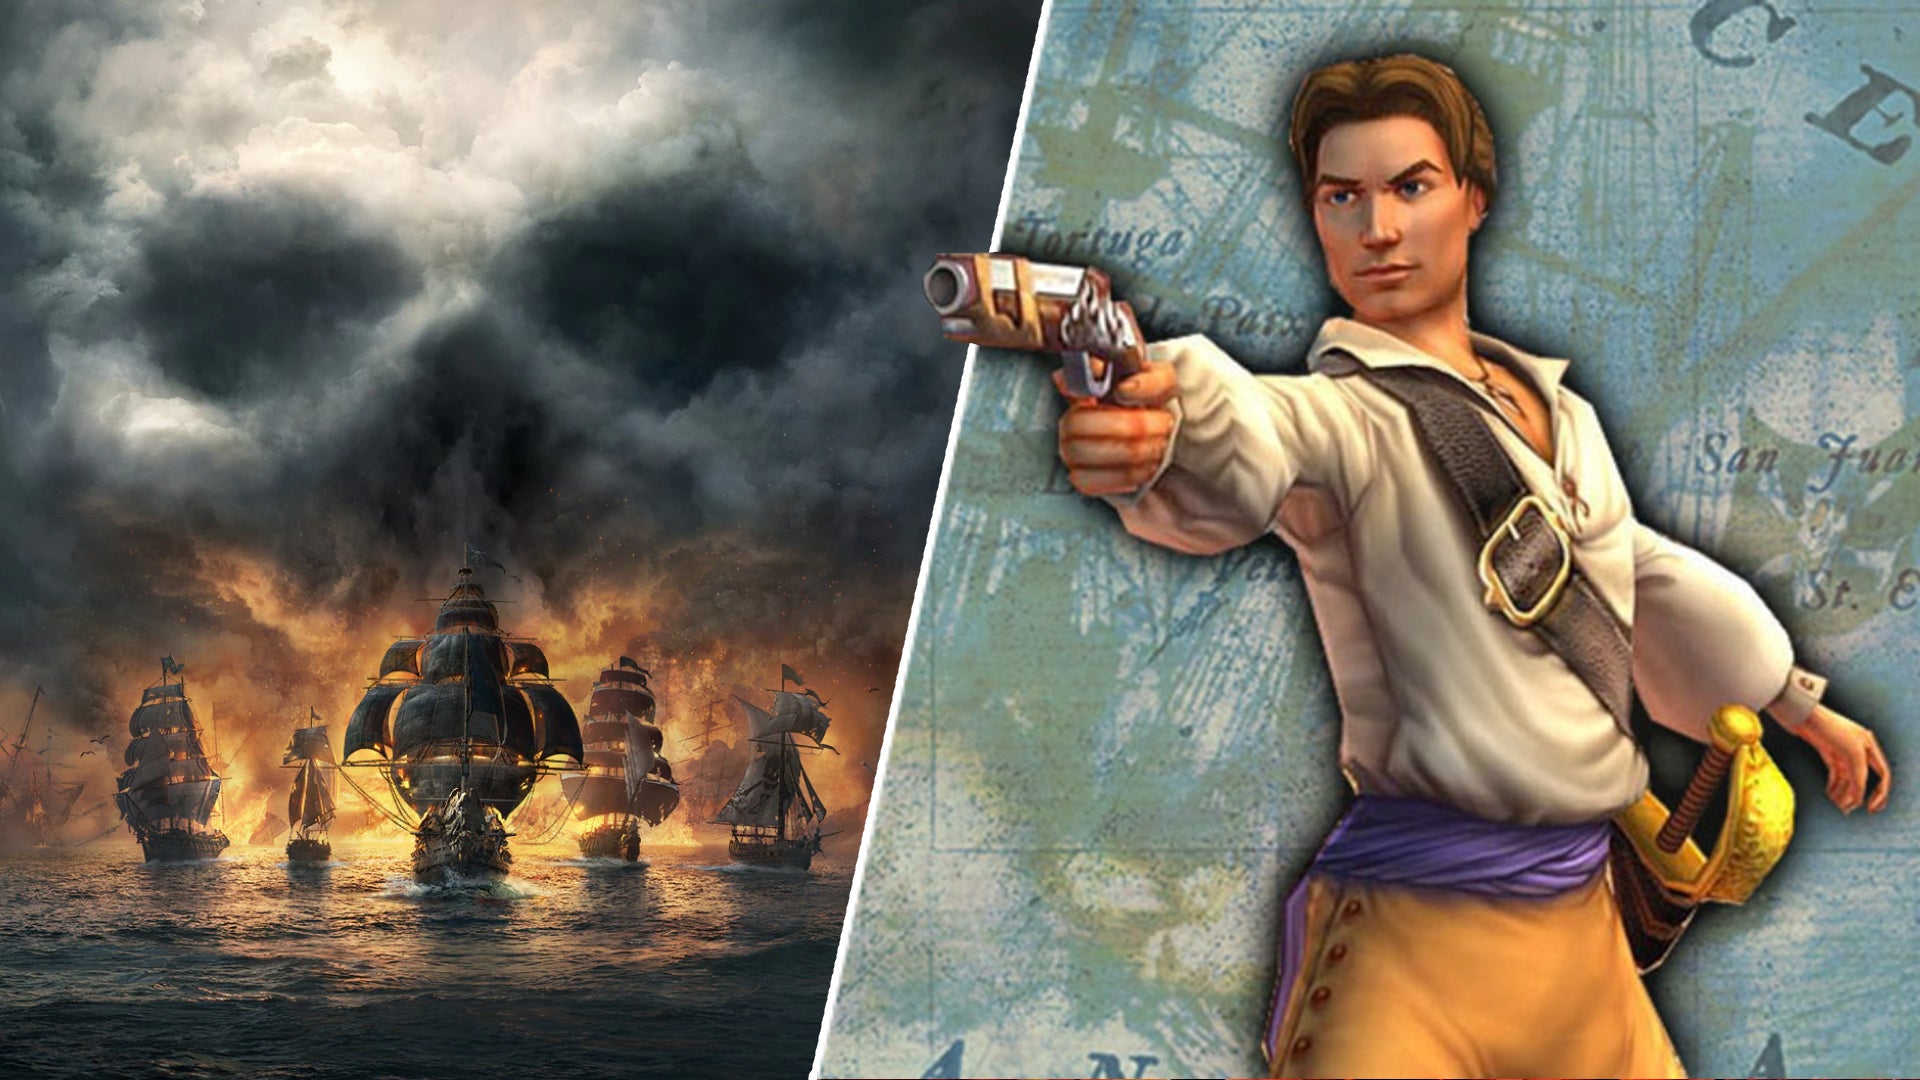 You can keep Skull and Bones – the best open world pirate game remains Sid Meier's Pirates!